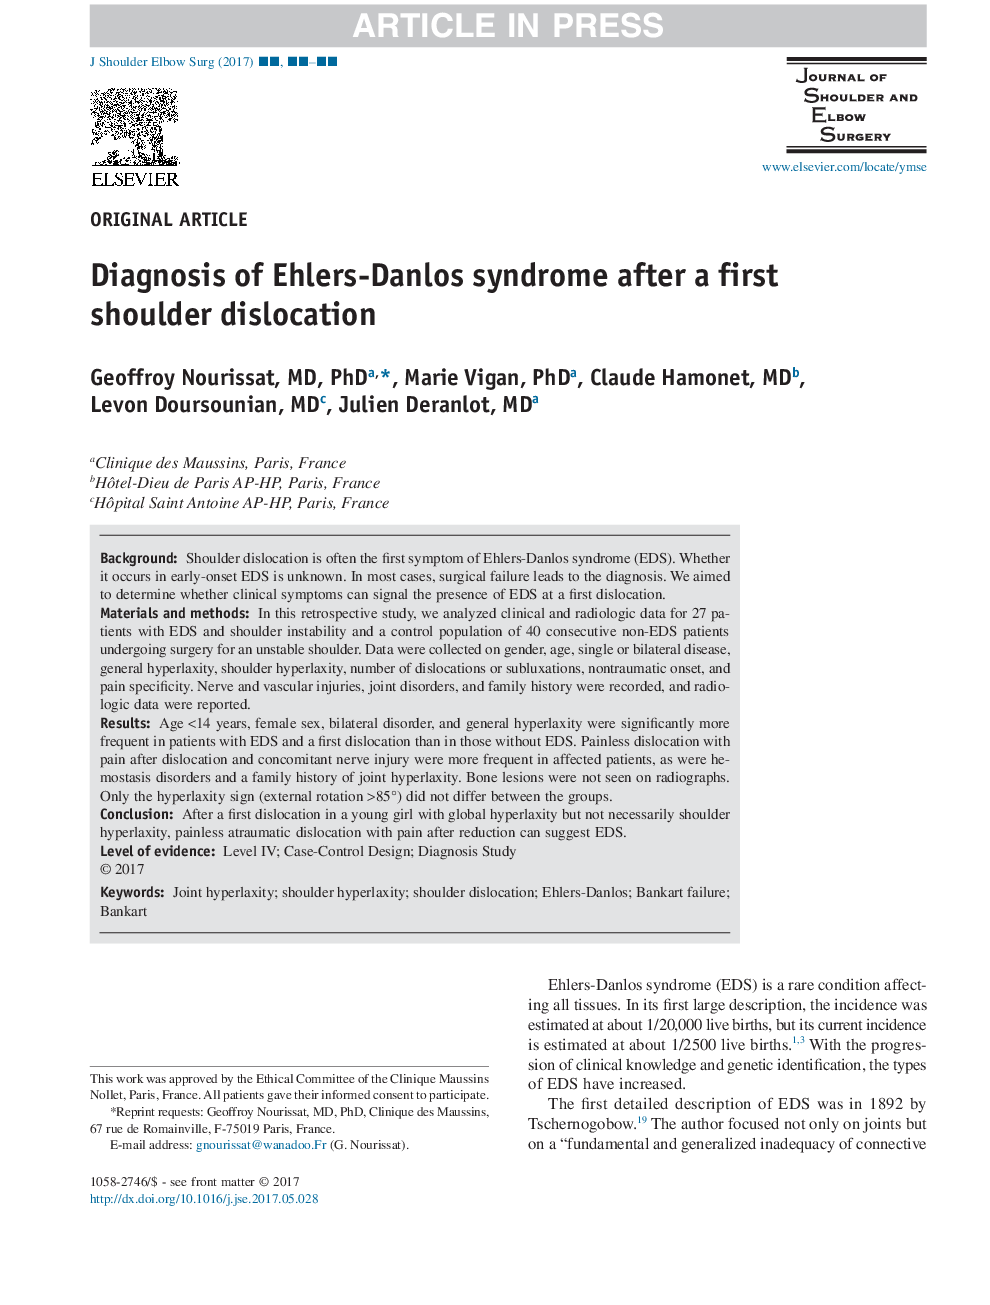 Diagnosis of Ehlers-Danlos syndrome after a first shoulder dislocation